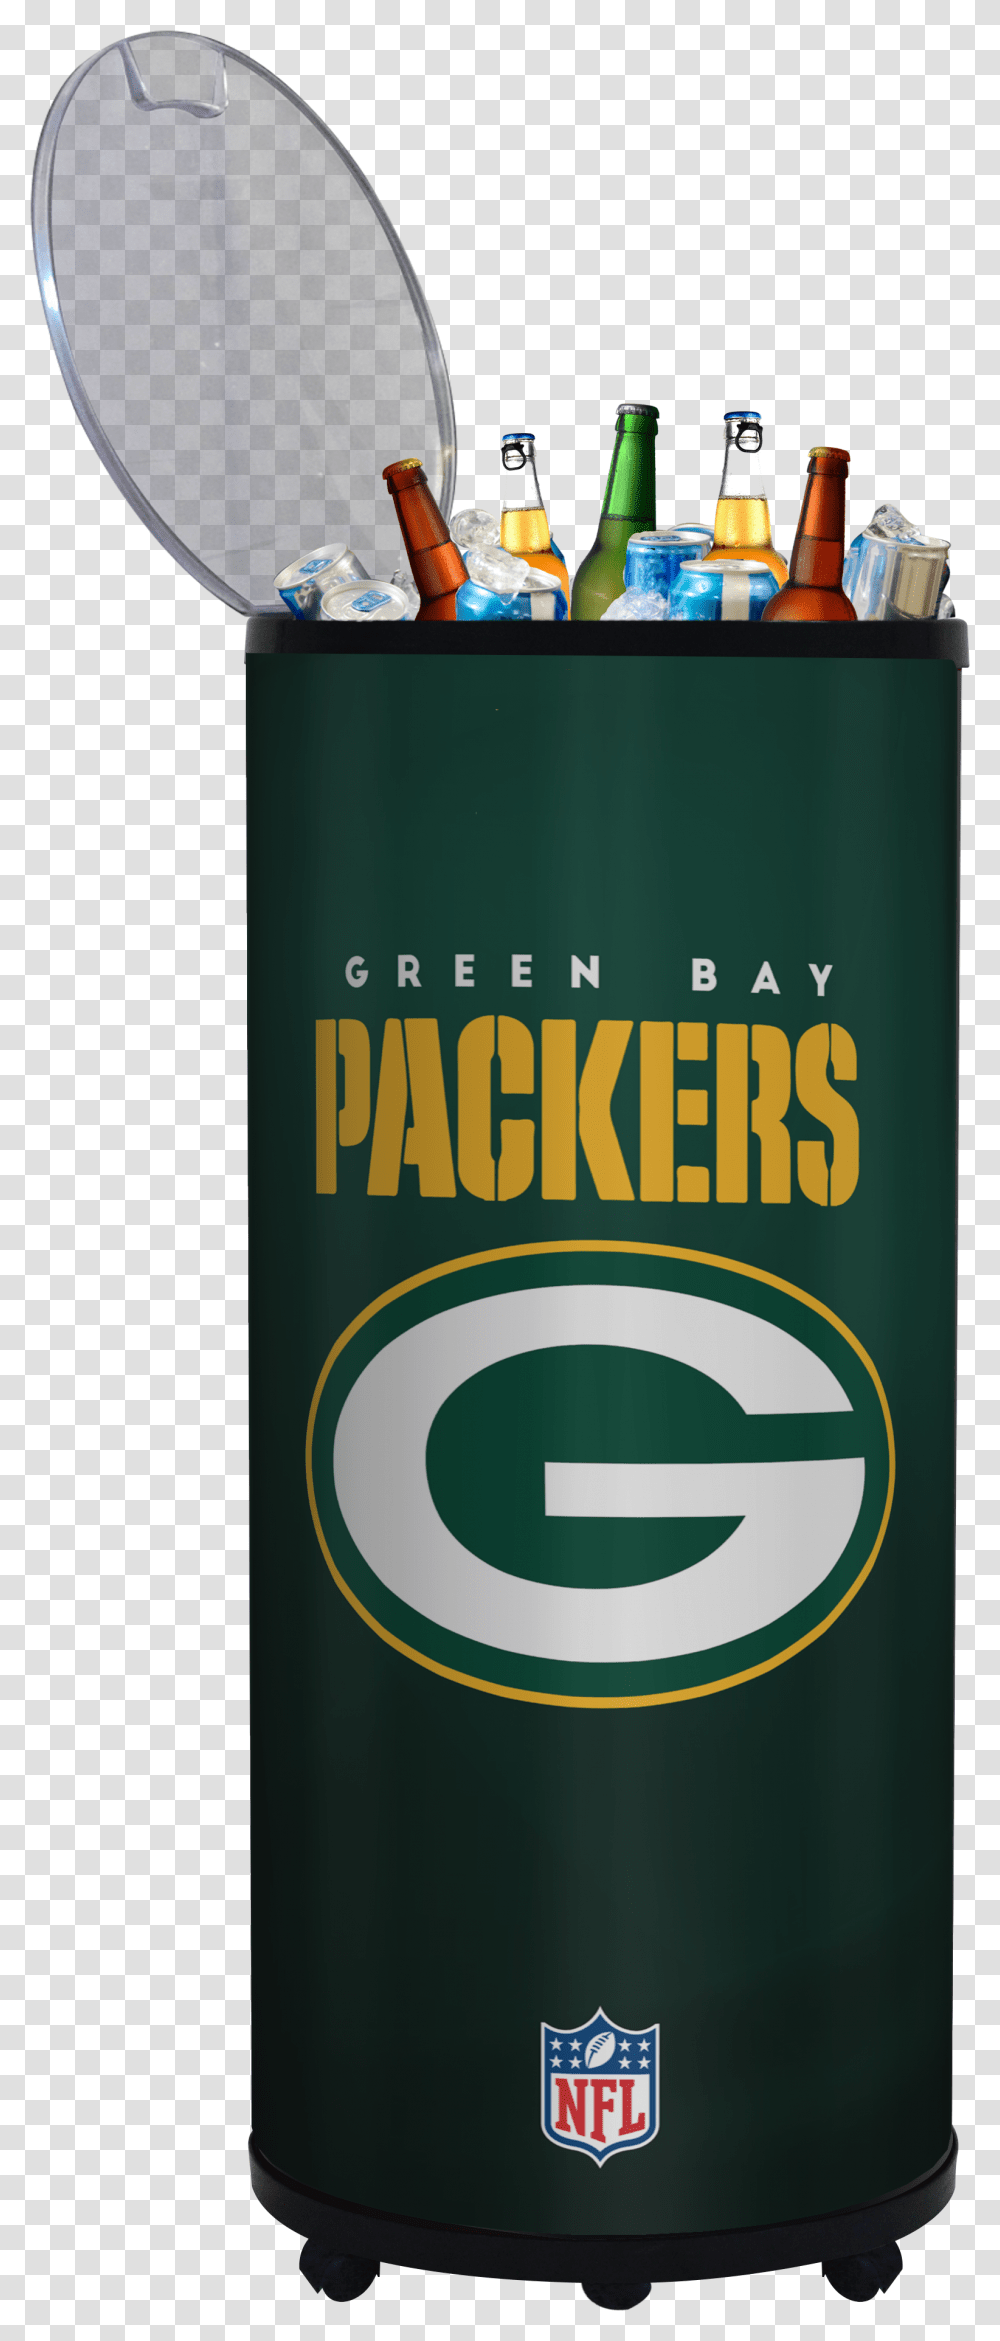 Download Green Bay Packers Fans Nfl Football Poster Green Bay Packers, Beverage, Drink, Bottle, Alcohol Transparent Png